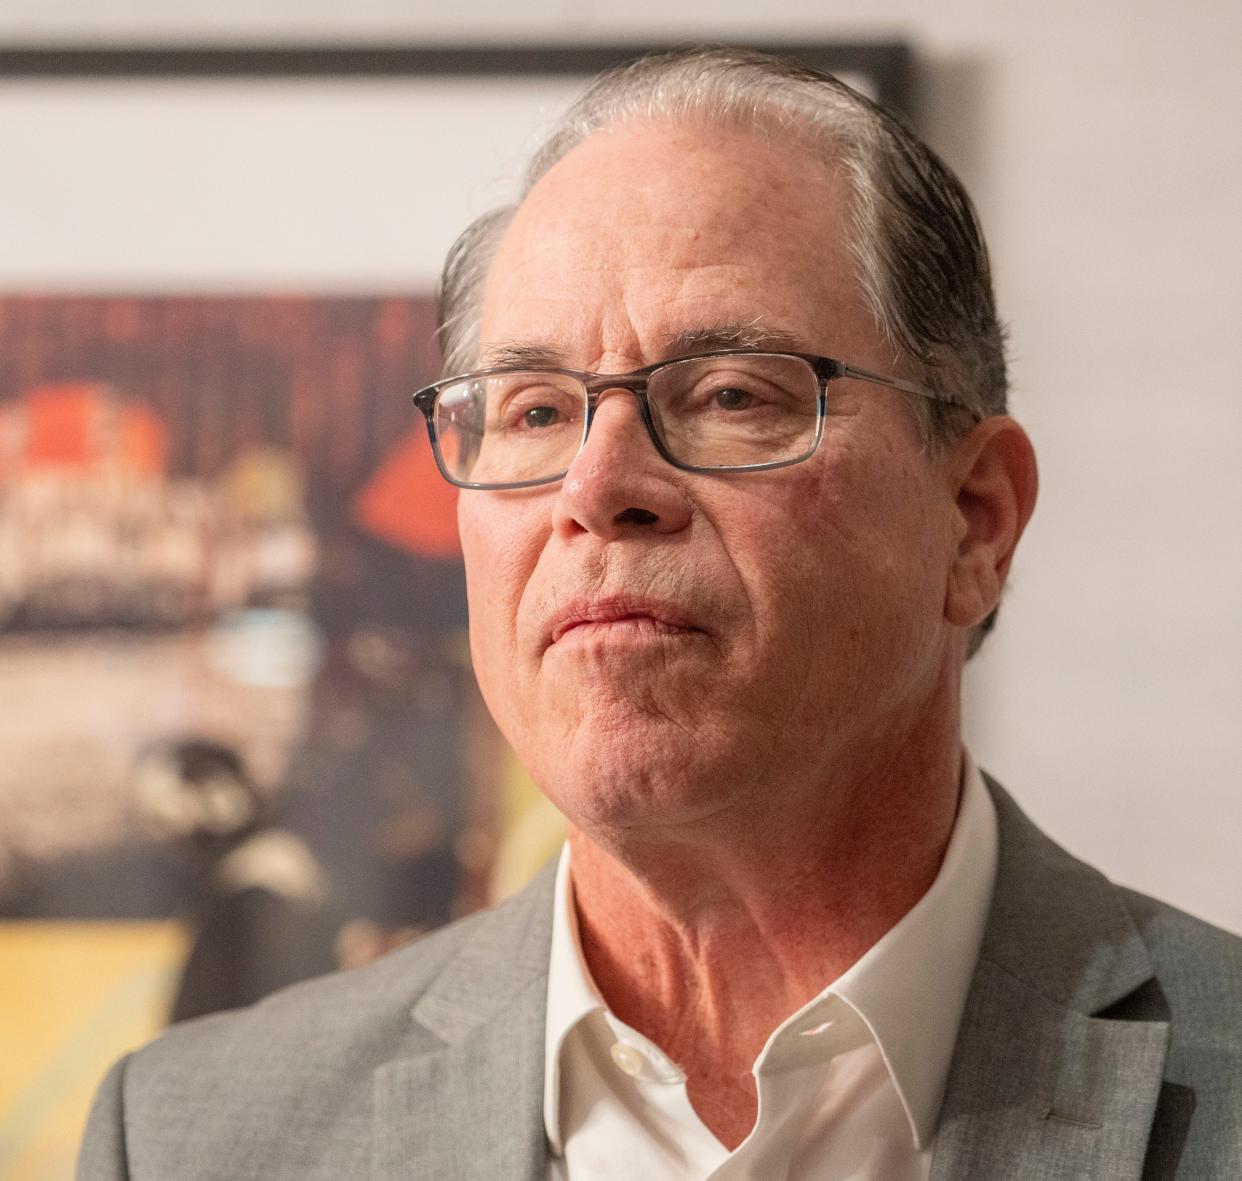 U.S. Sen. Mike Braun (R-IN) answers questions from readers about his bid for Indiana governor during an interview with the IndyStar on Friday, Jan. 1, 2021, at the PNC Center in Indianapolis.